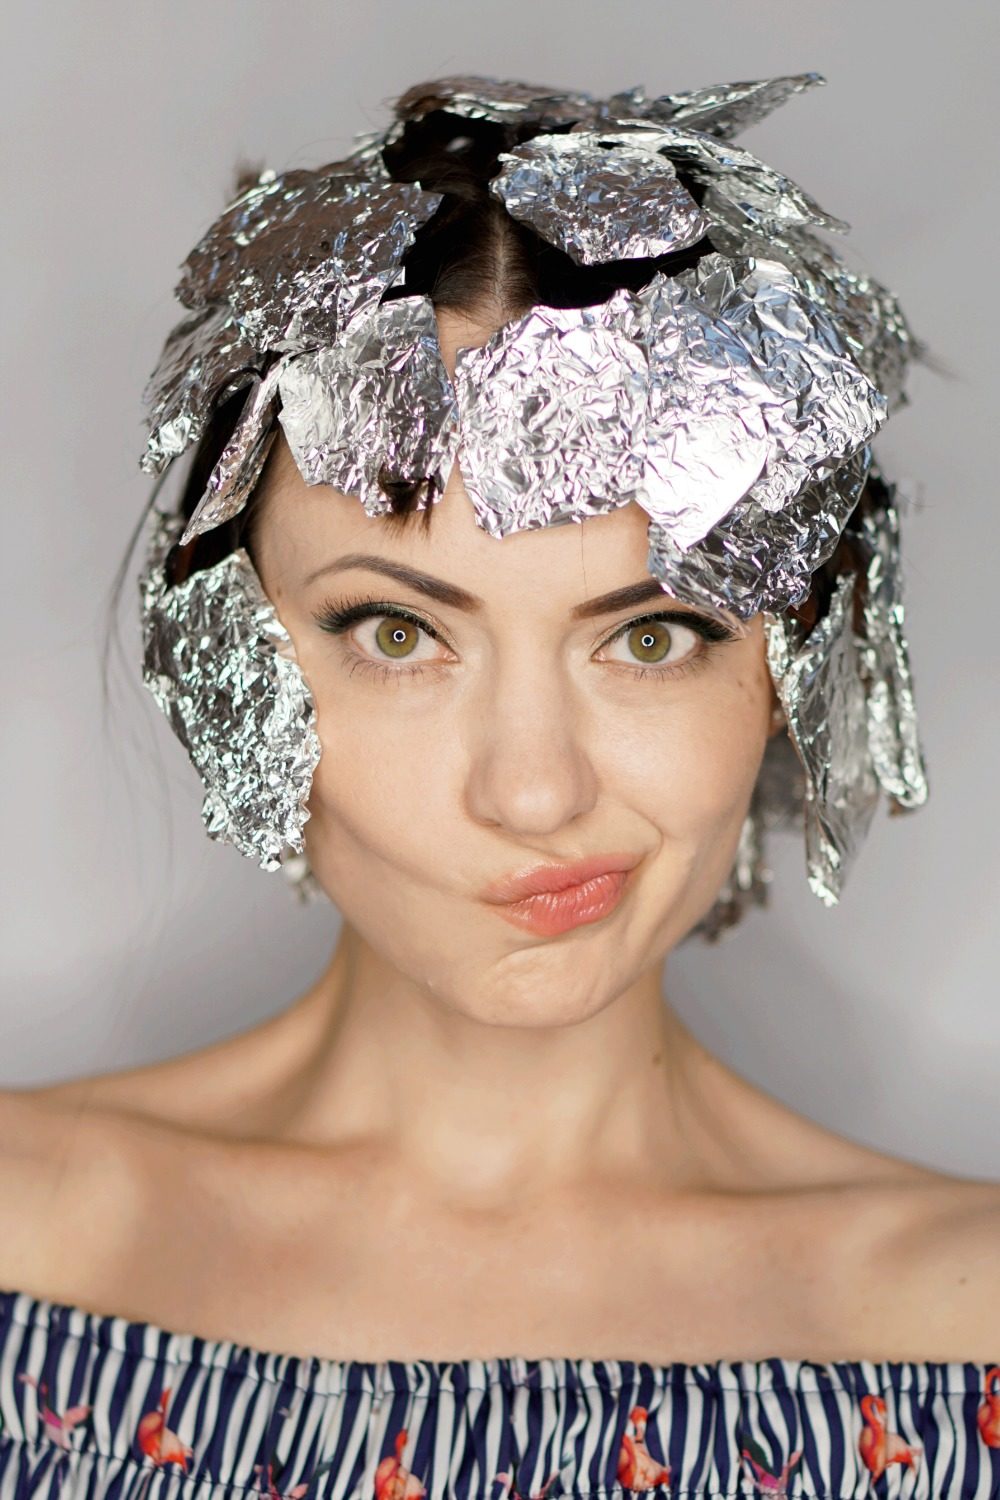 https://stylesprinter.com/wp-content/uploads/2016/07/StyleSprinter-How-To-Curl-Your-Hair-Using-A-Flat-Iron-And-Aluminum-Foil-2-1000x1500.jpg